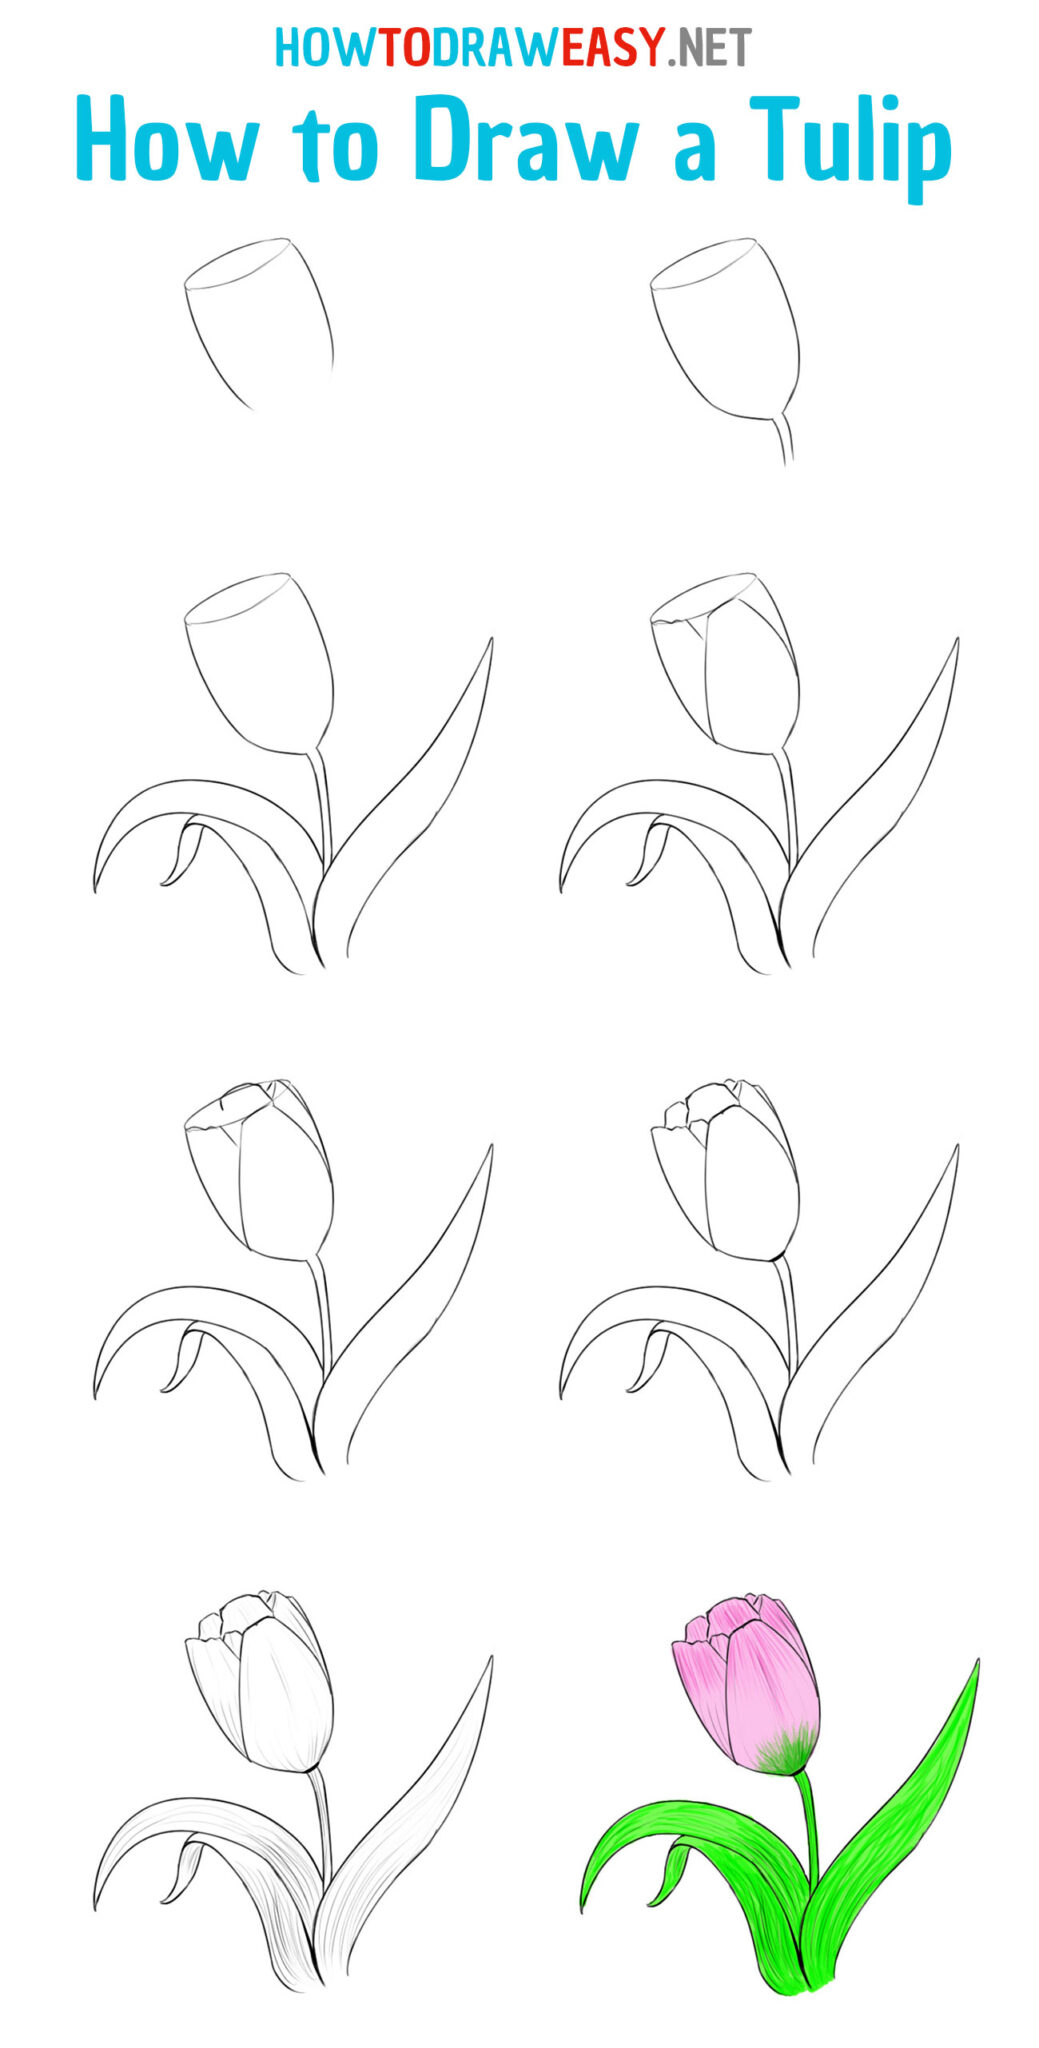 Adding extra details to your tulip drawing